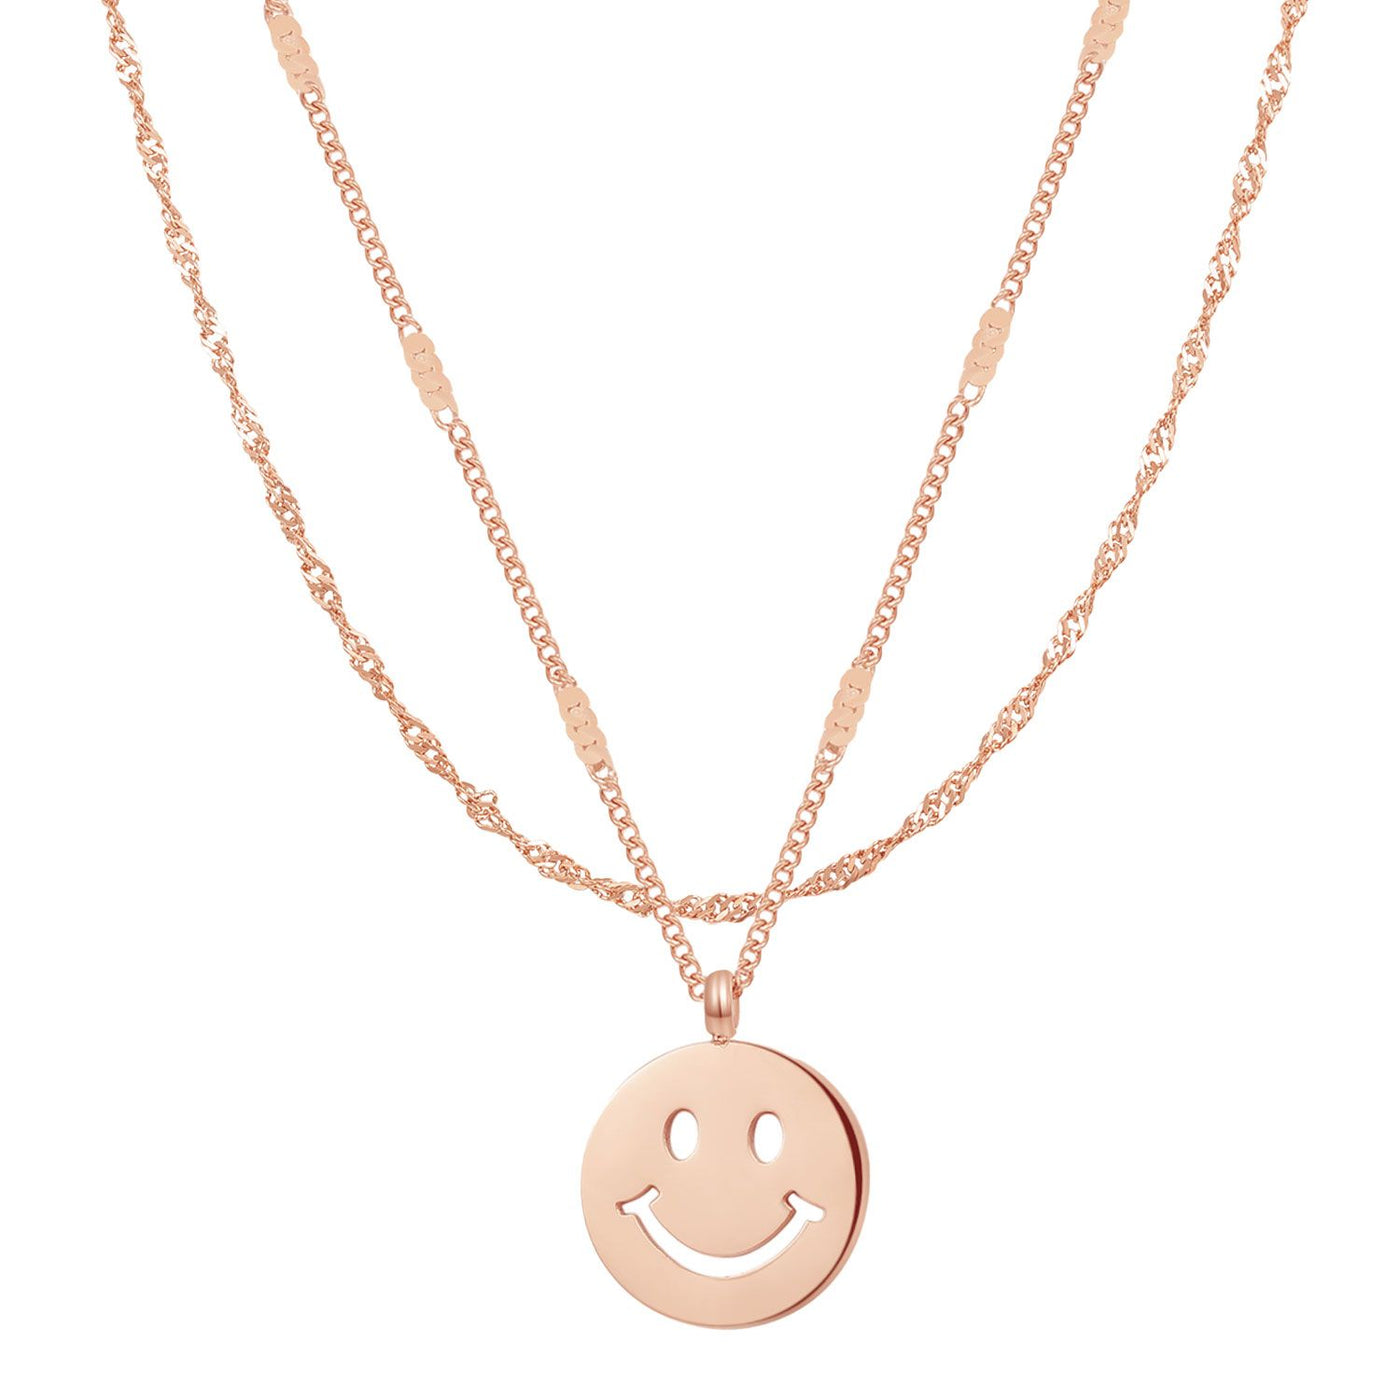 Smiley Face Layering Necklaces Set